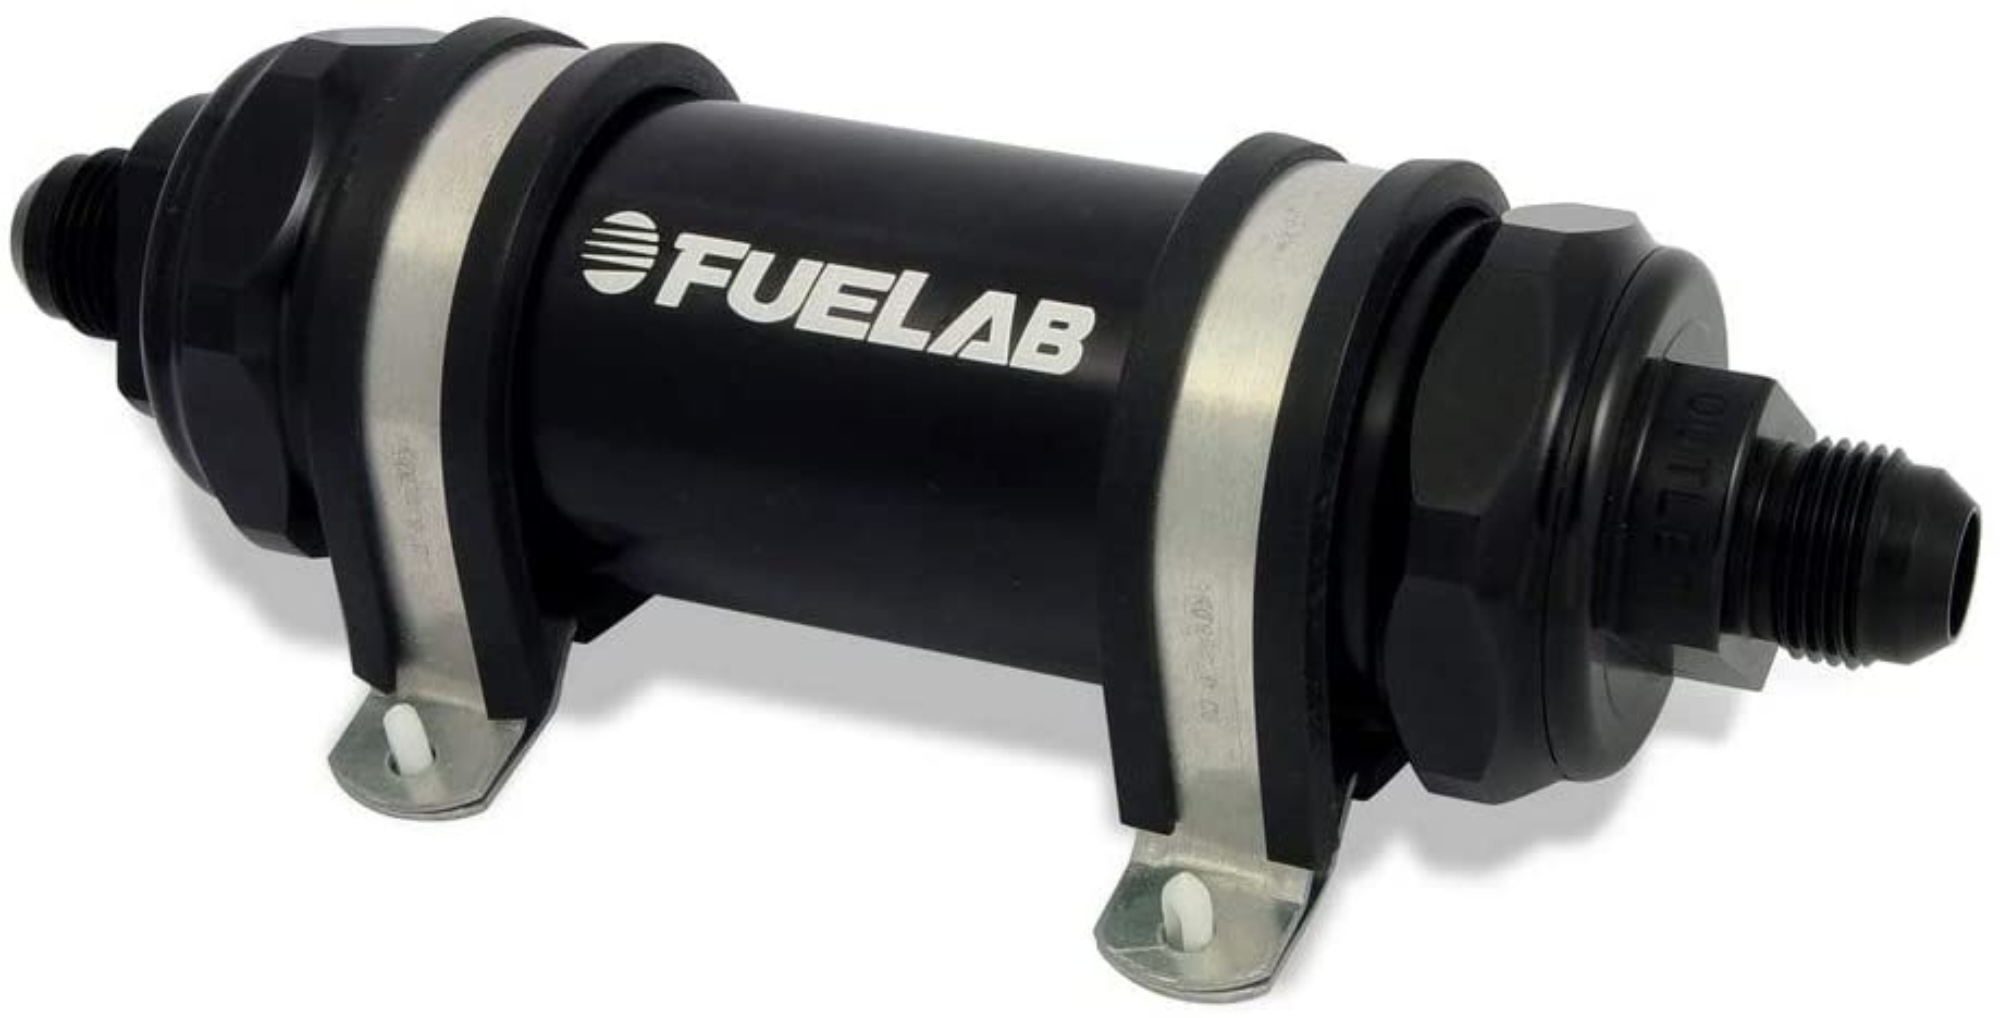 FueLab 82802-1 Fuel Filter, In-Line, 10 Micron, 5 in Paper Element, 8 AN Male Inlet, 8 AN Male Outlet, Aluminum, Black Anodized, Each